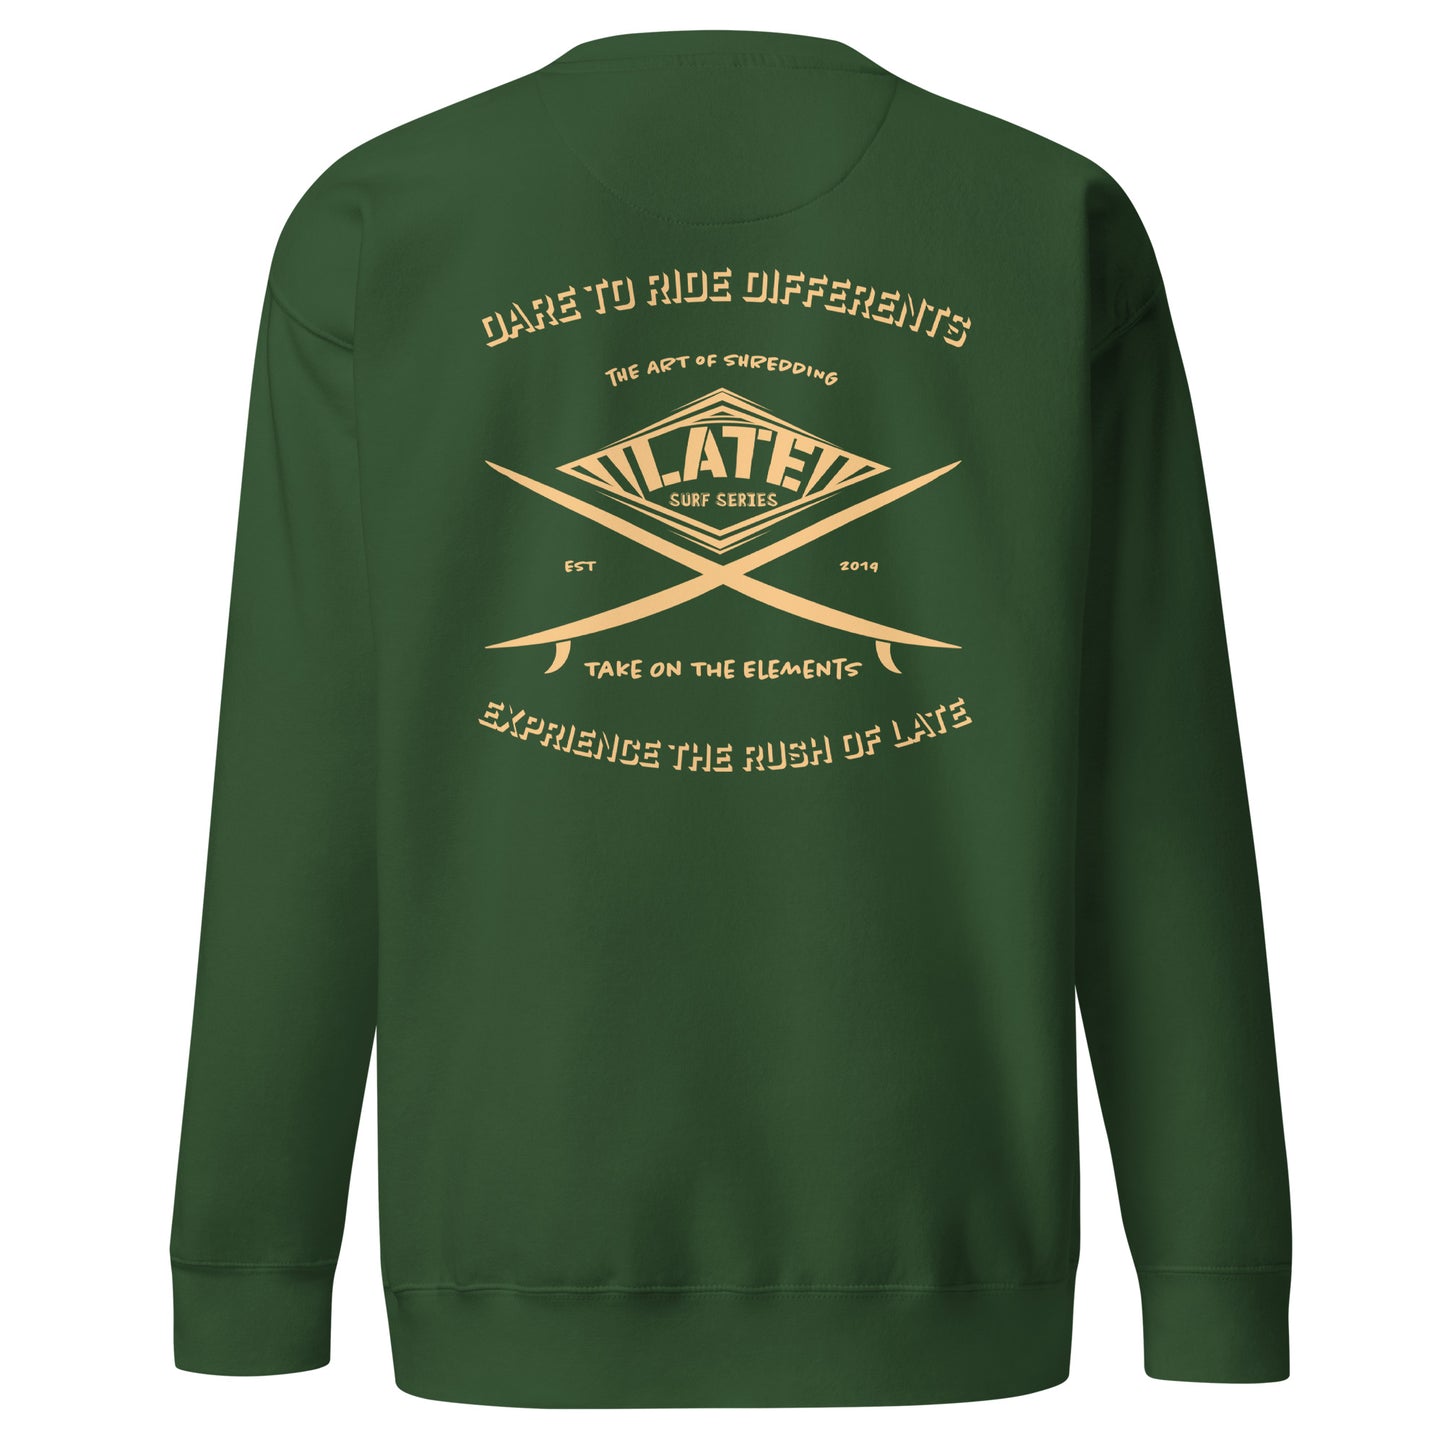 Sweatshirt surfboard dare to ride differents Take On The Elements experience the rush with Late de dos unisex couleur vert